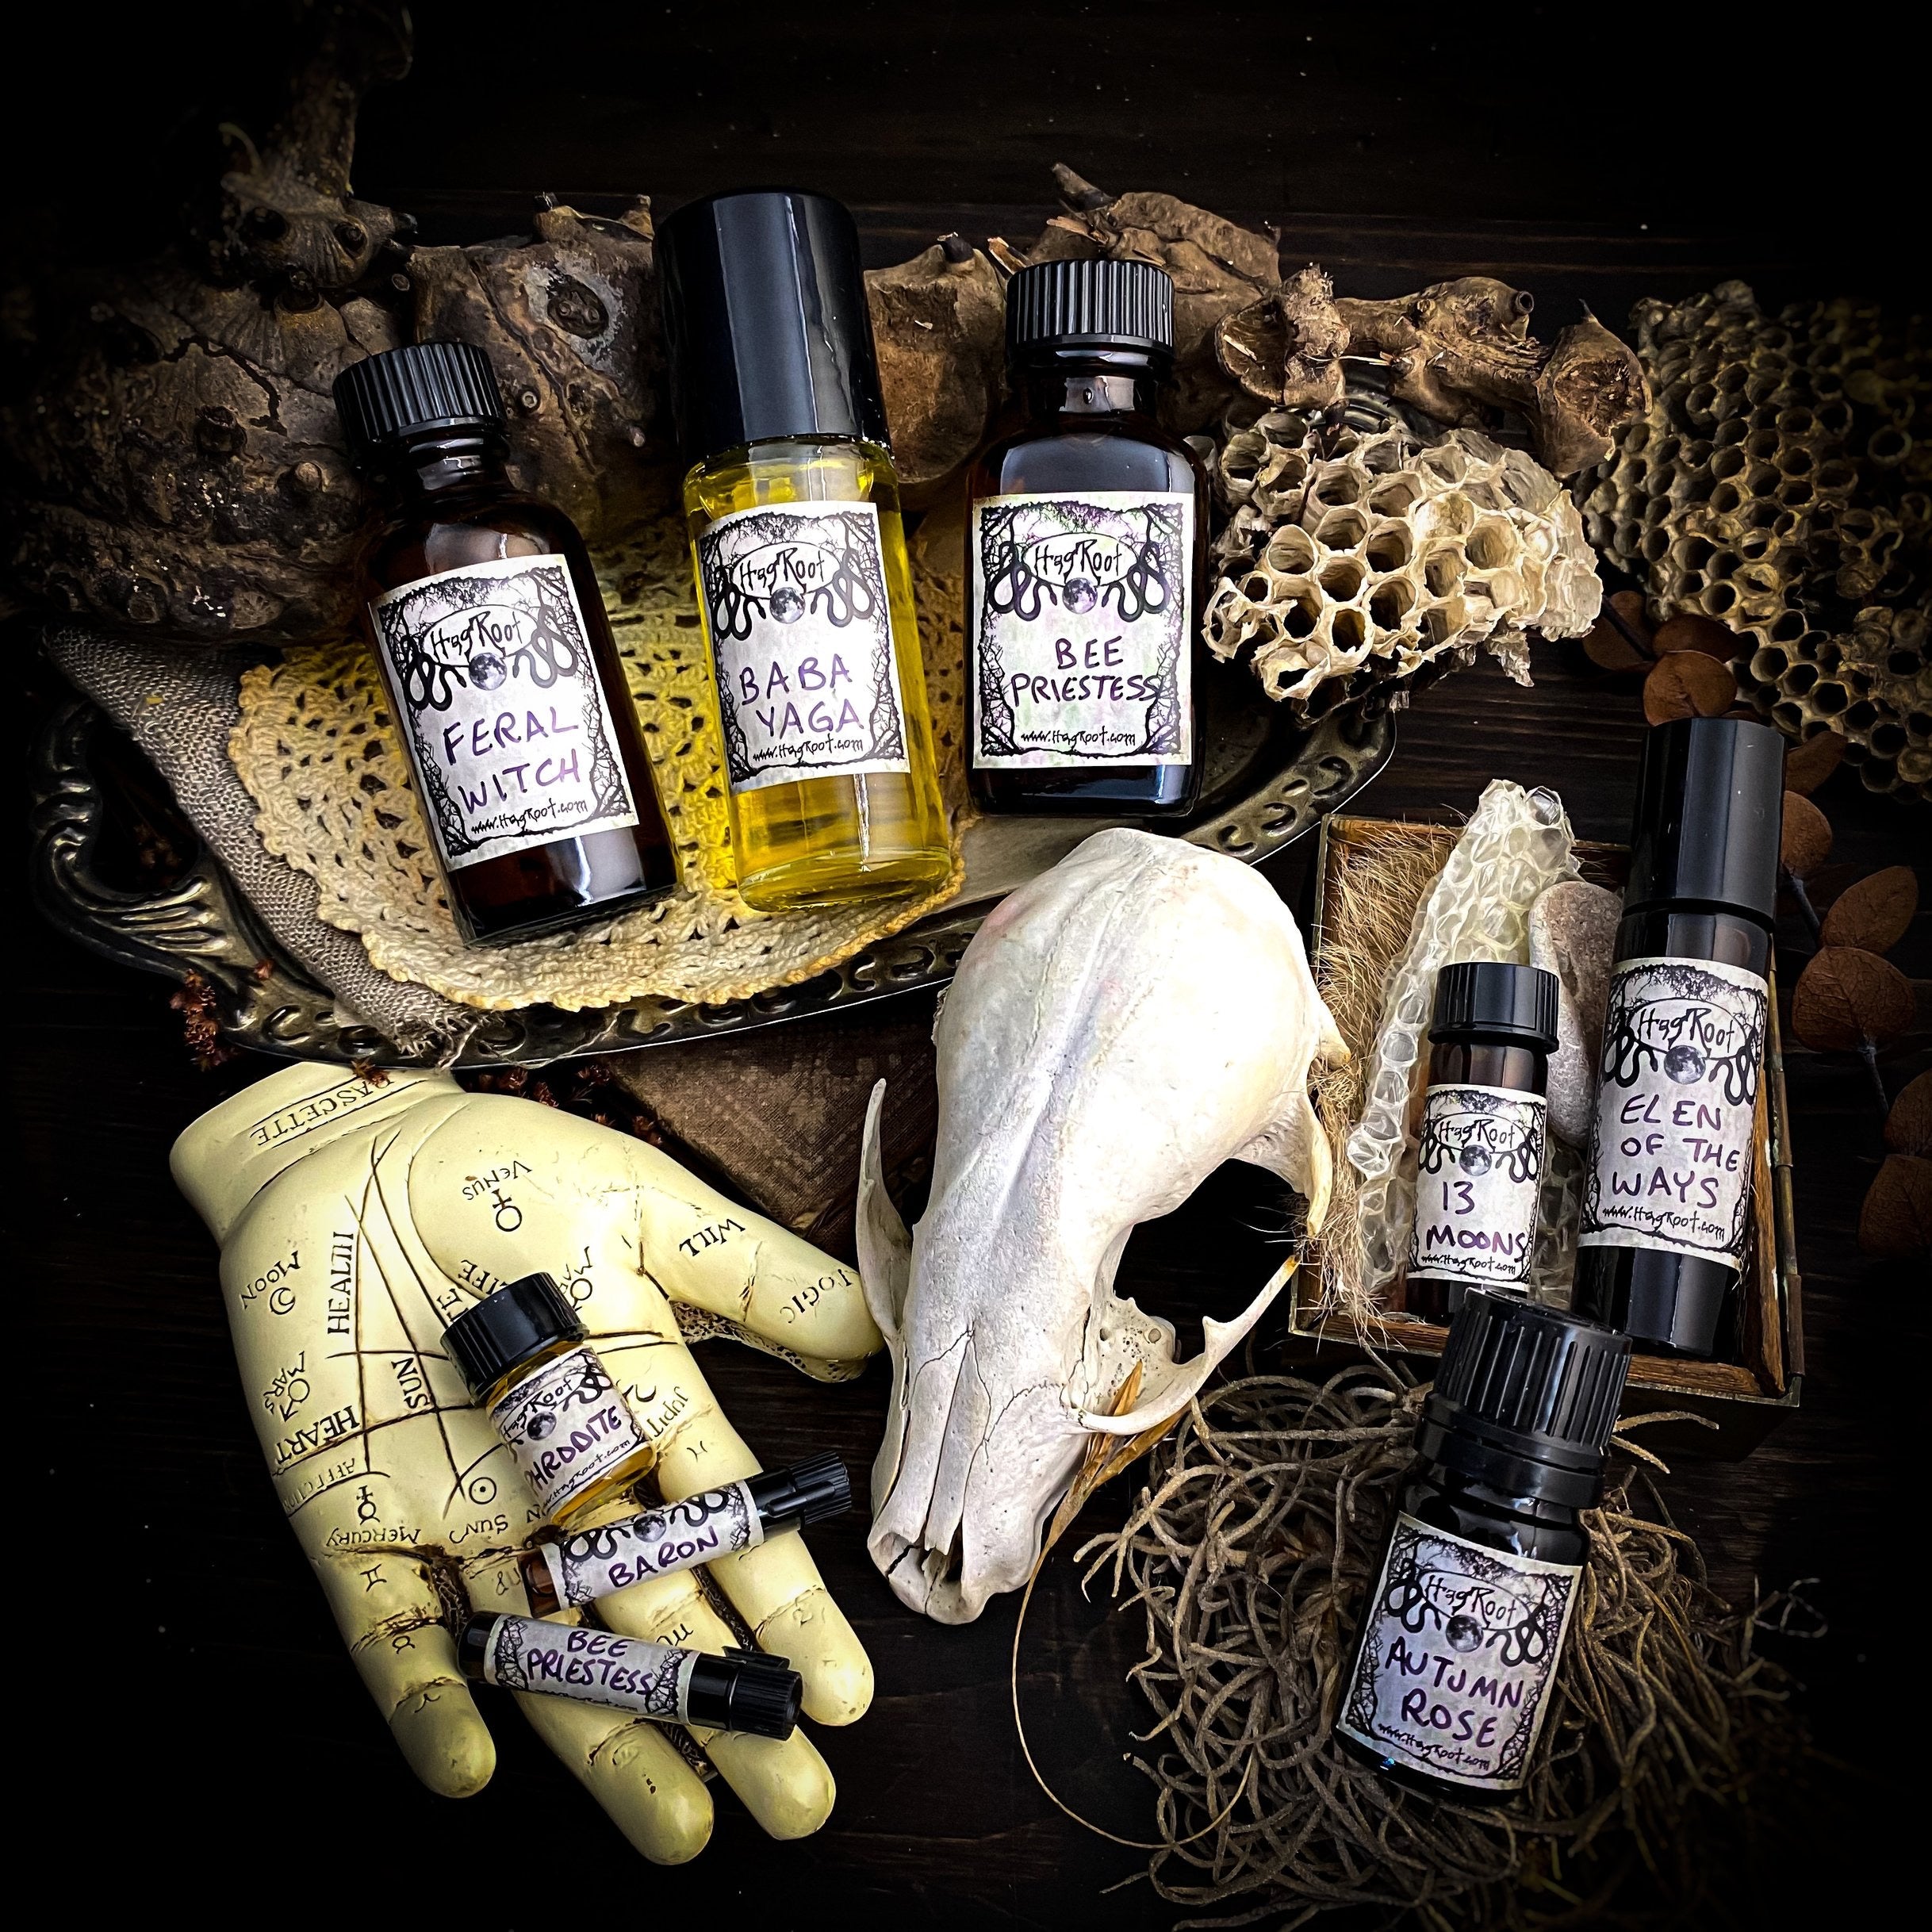 MEDICINE MAN-(Sweetgrass, Tobacco, Cedar, Leather, Ceremonial Offerings)-Perfume, Cologne, Anointing, Ritual Oil